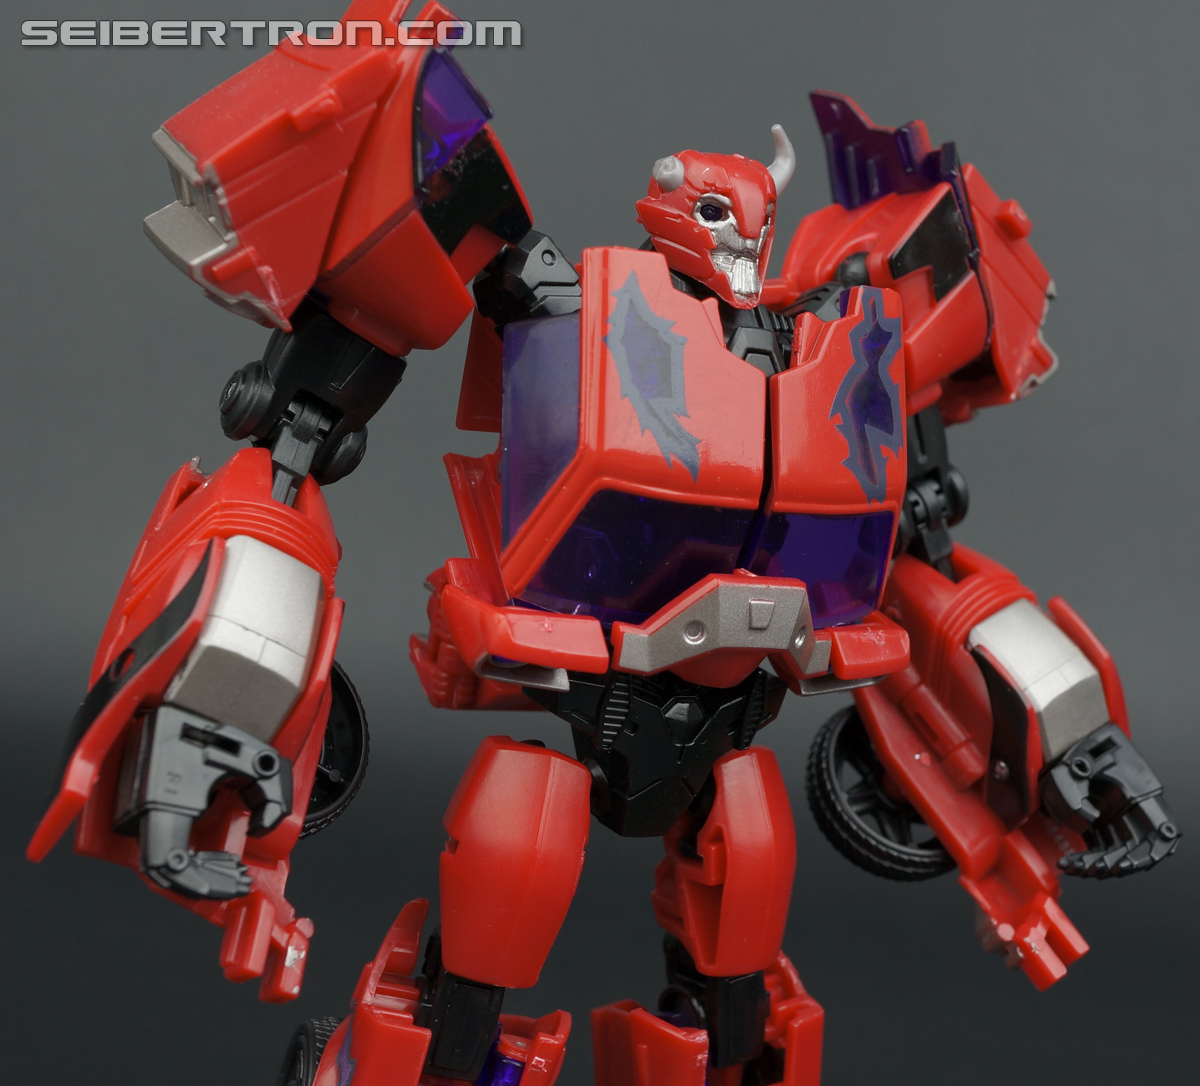 Transformers Prime: First Edition Terrorcon Cliffjumper (Image #67 of 179)